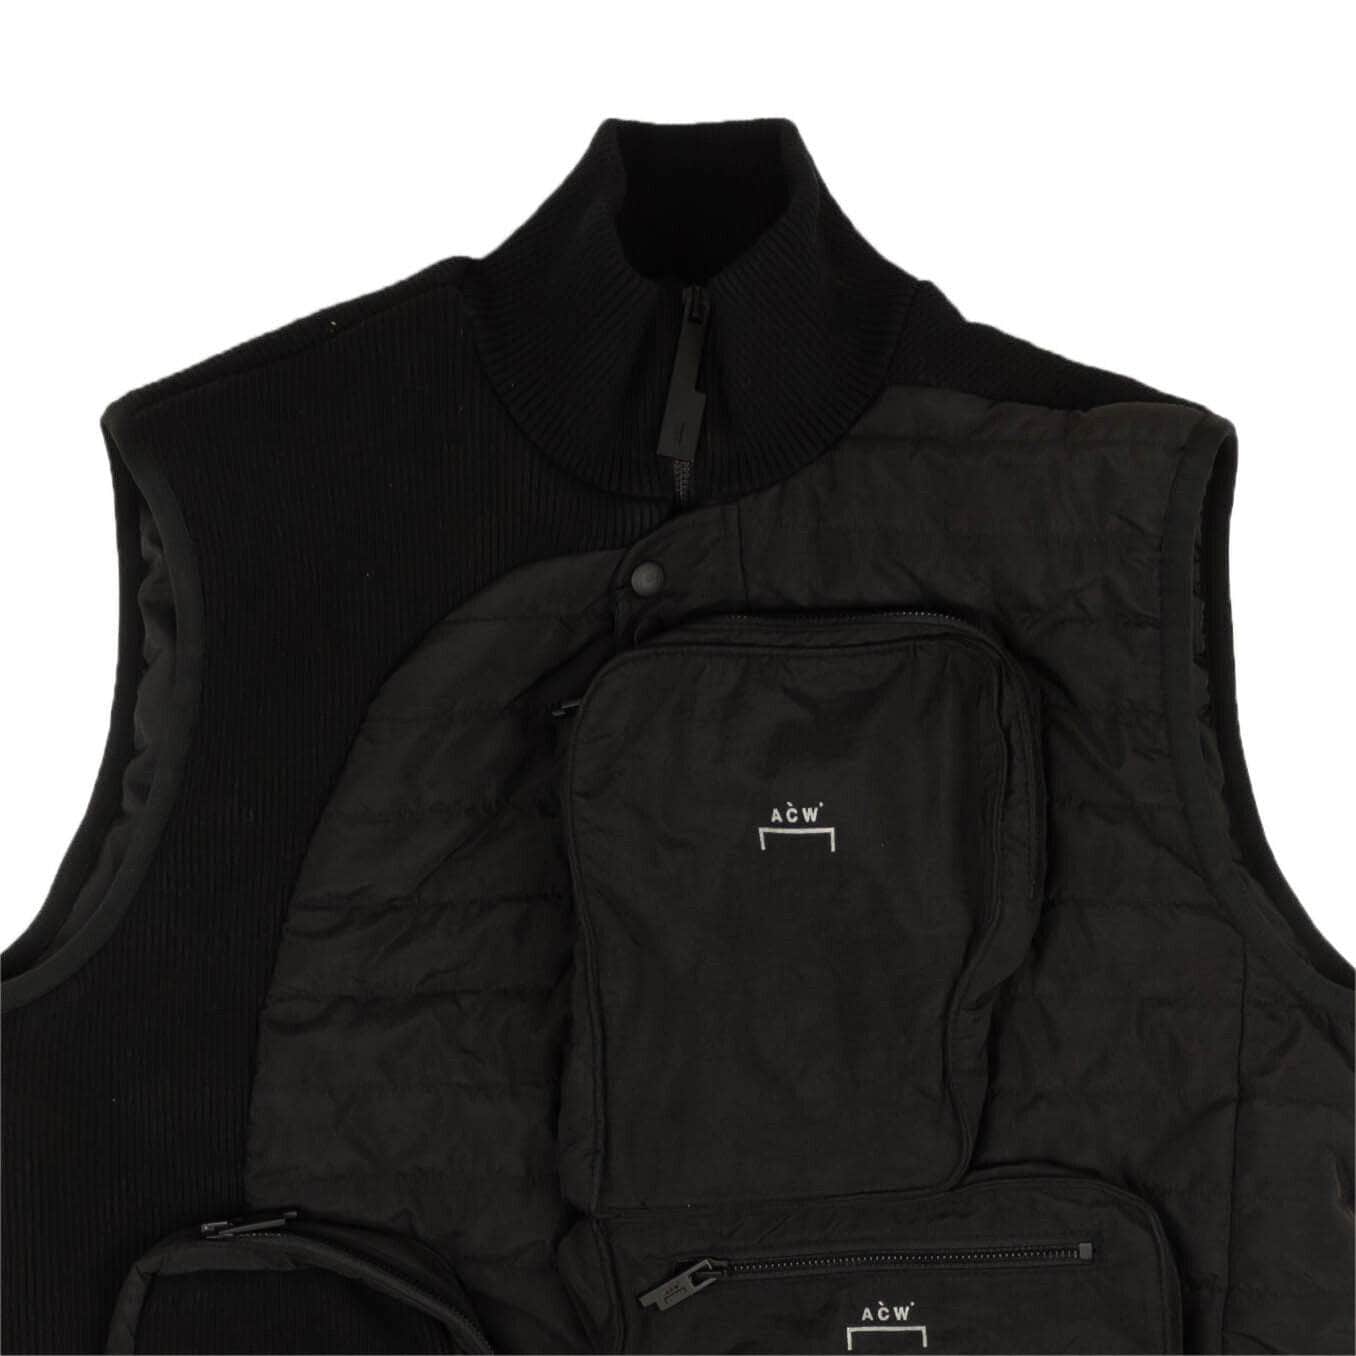 A-COLD-WALL* 750-1000, a-cold-wall, channelenable-all, chicmi, couponcollection, gender-mens, main-clothing, mens-outerwear-vests, mens-shoes, size-l L Black Puffer Outerwear Vest 95-ACW-0002/L 95-ACW-0002/L